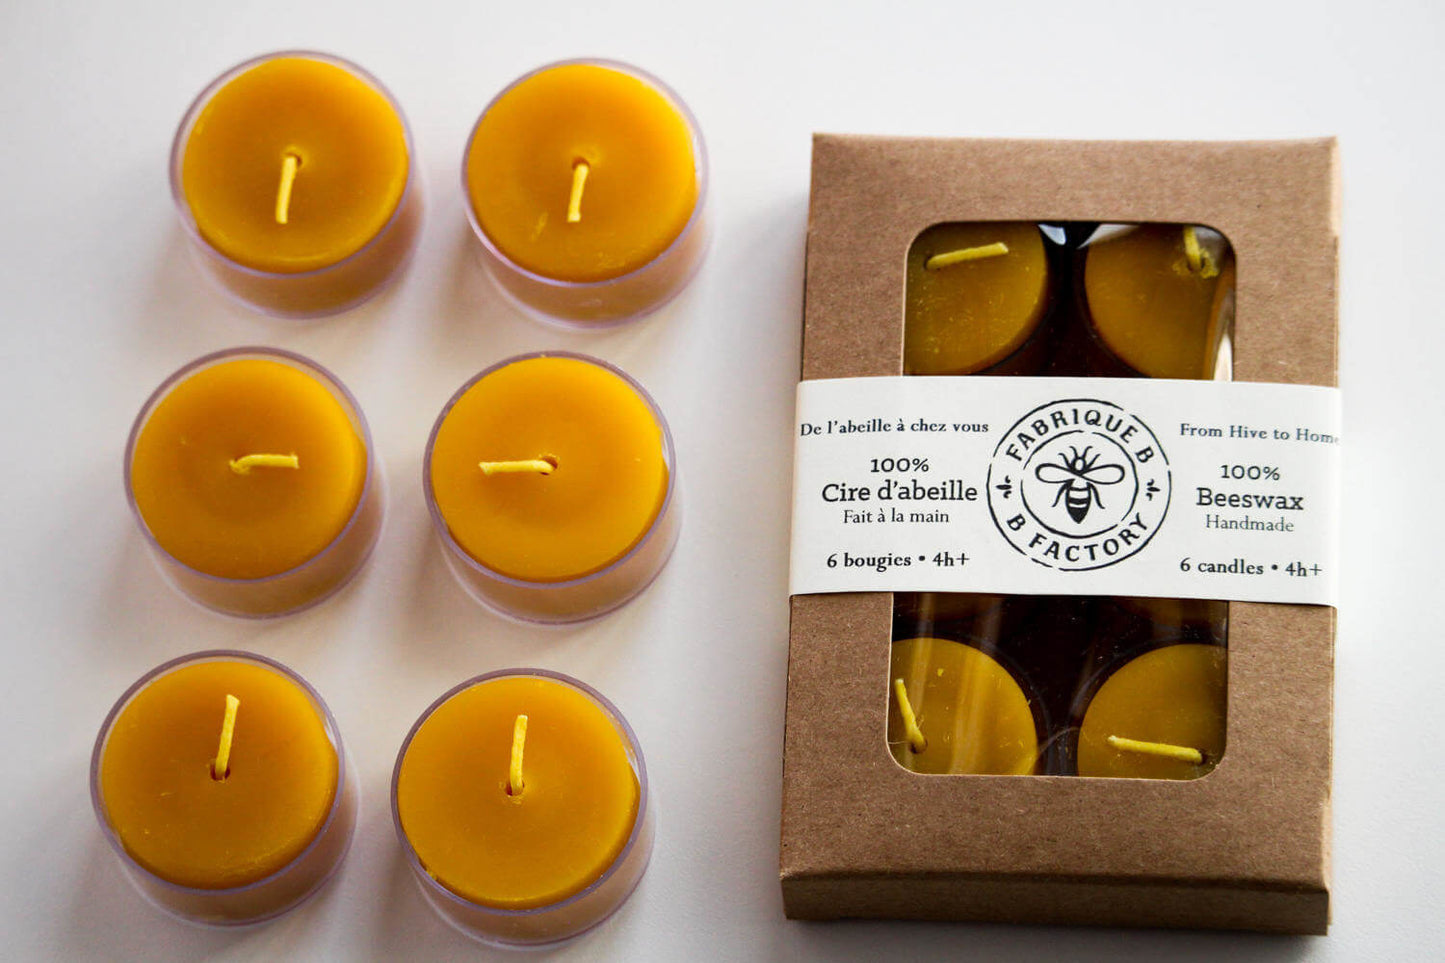 6 beeswax tea light candles next to set of 6 beeswax tea light candles in gift box with B Factory logo on lid